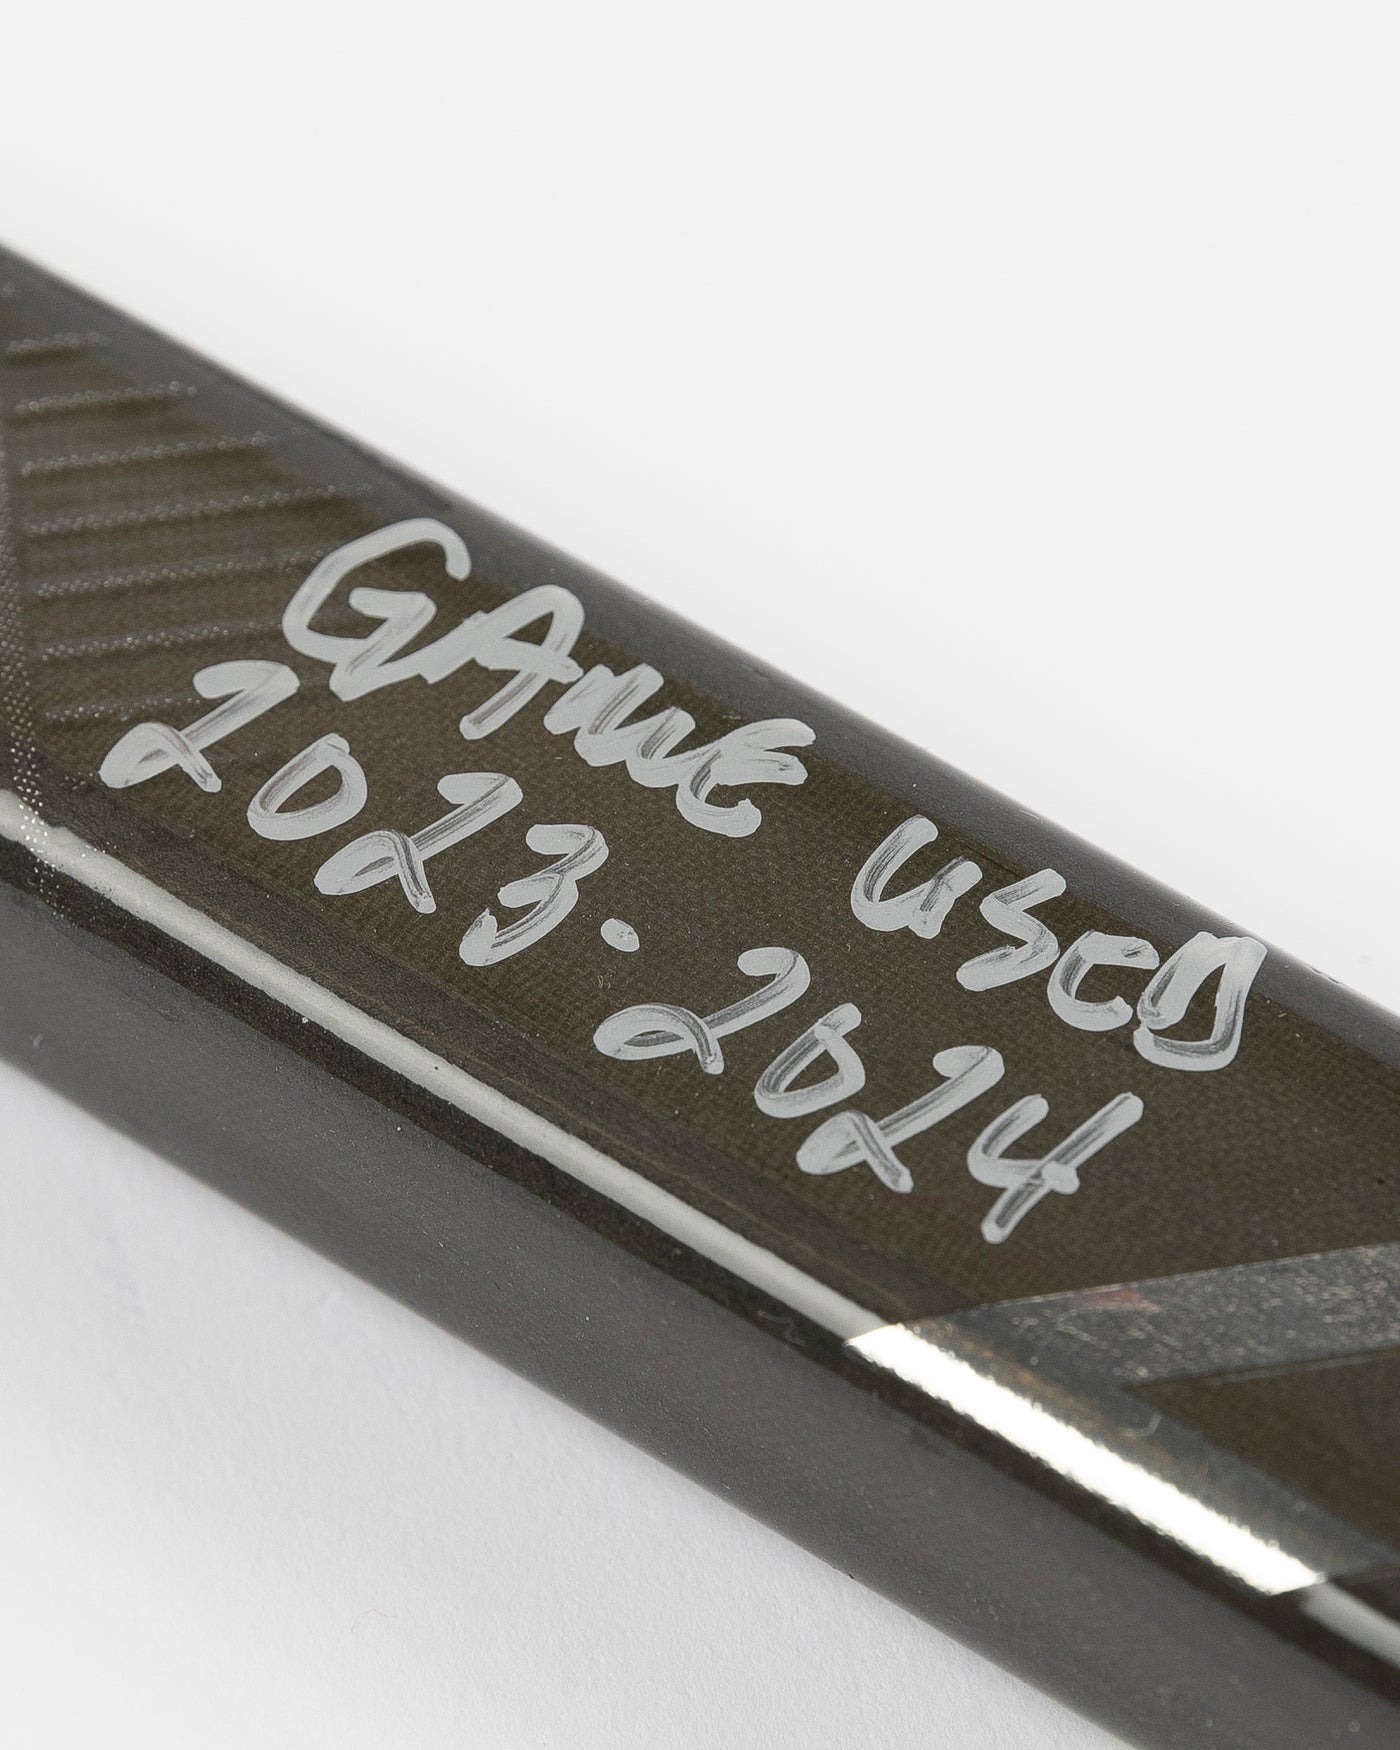 signed and game-used hockey stick from Chicago Blackhawks Andreas Athanasiou - game used label detail lay flat